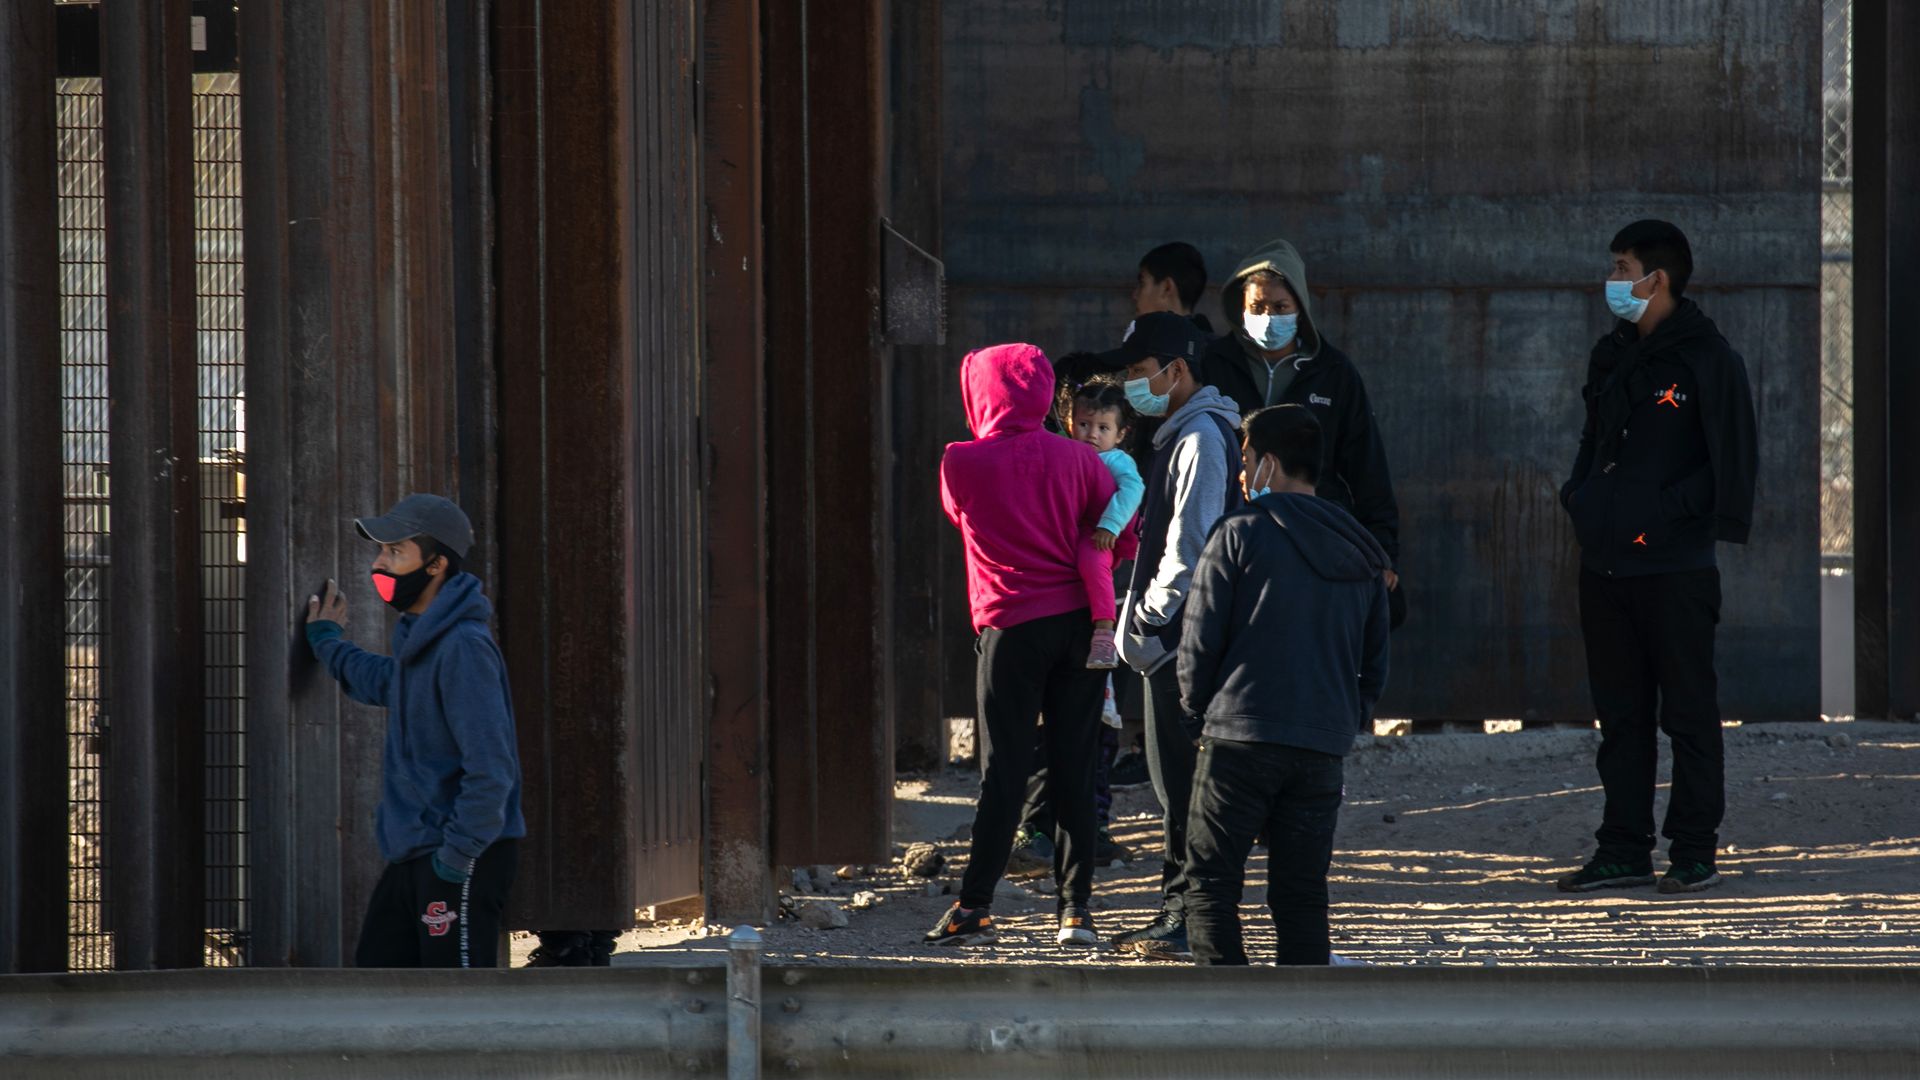 Undocumented immigrants stand next to the border wall while waiting for U.S. Border Patrol agents to arrive 